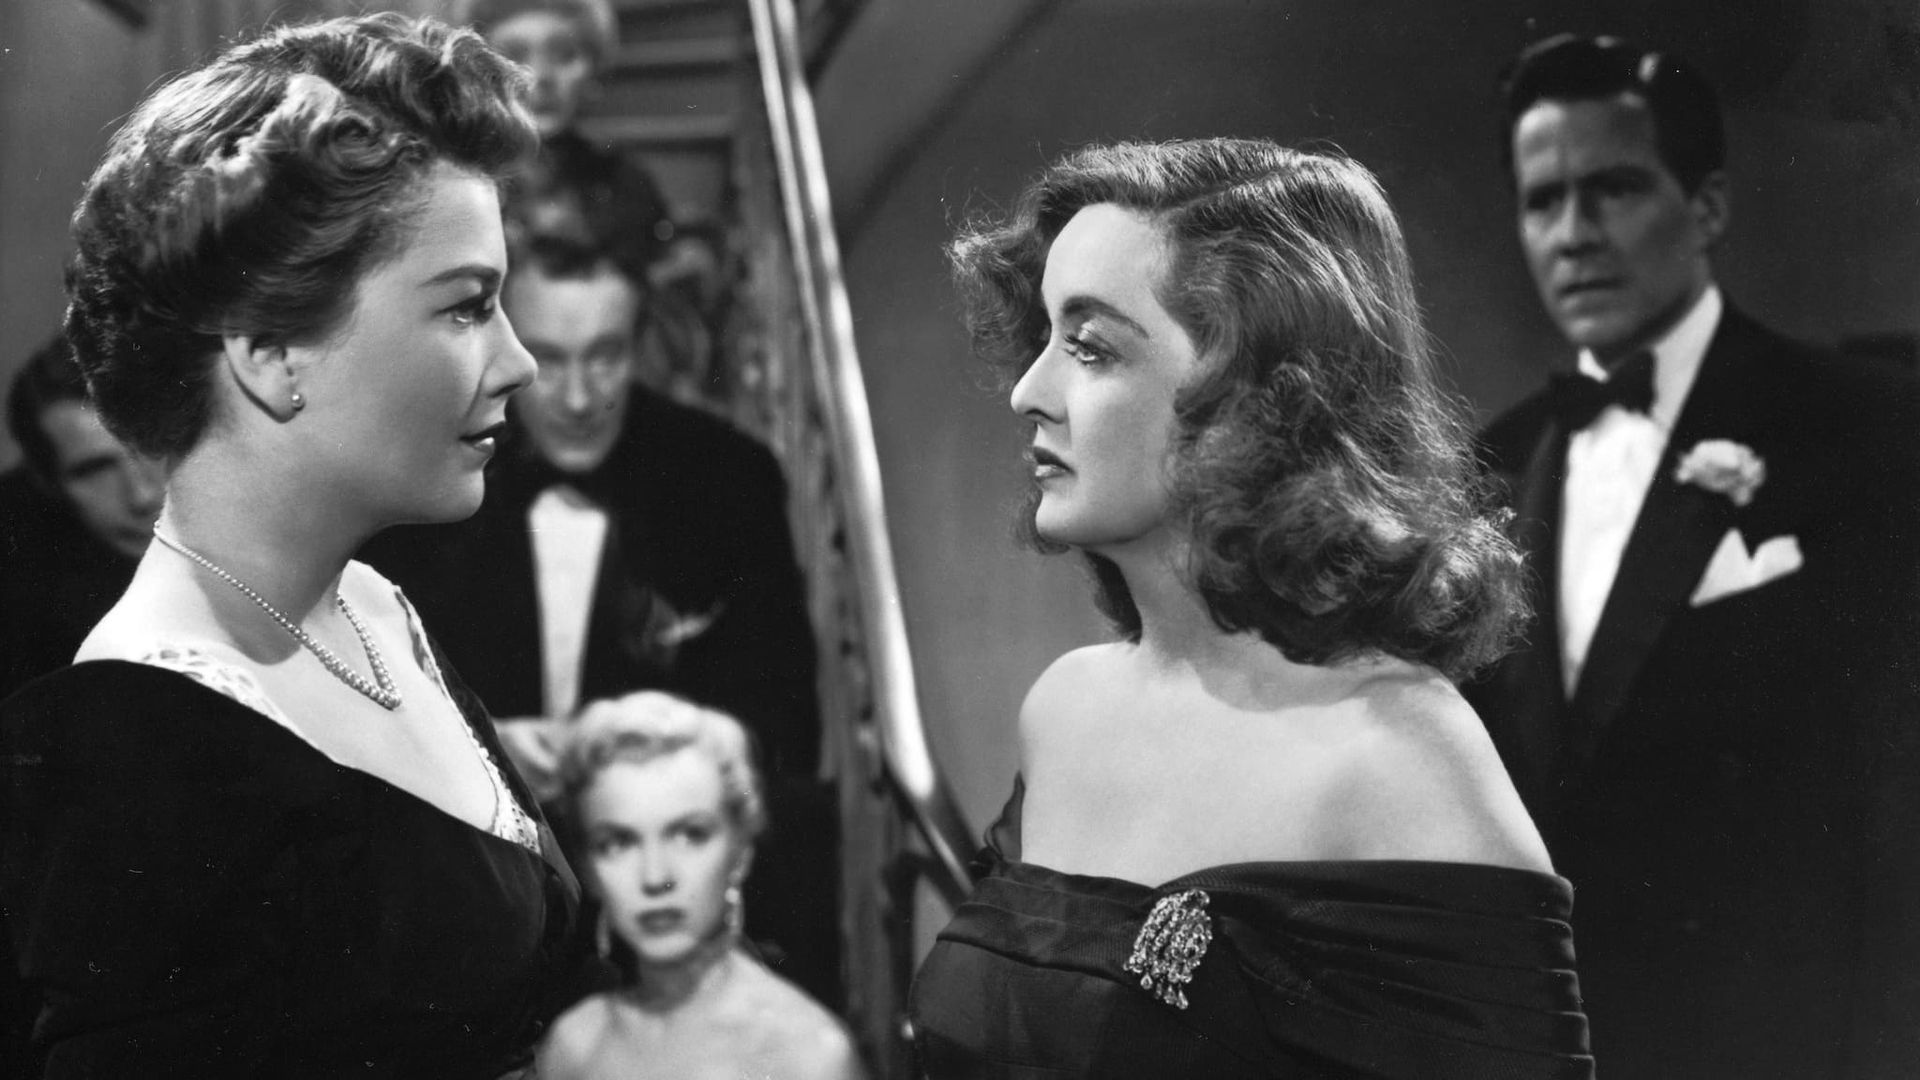 All About Eve Backdrop